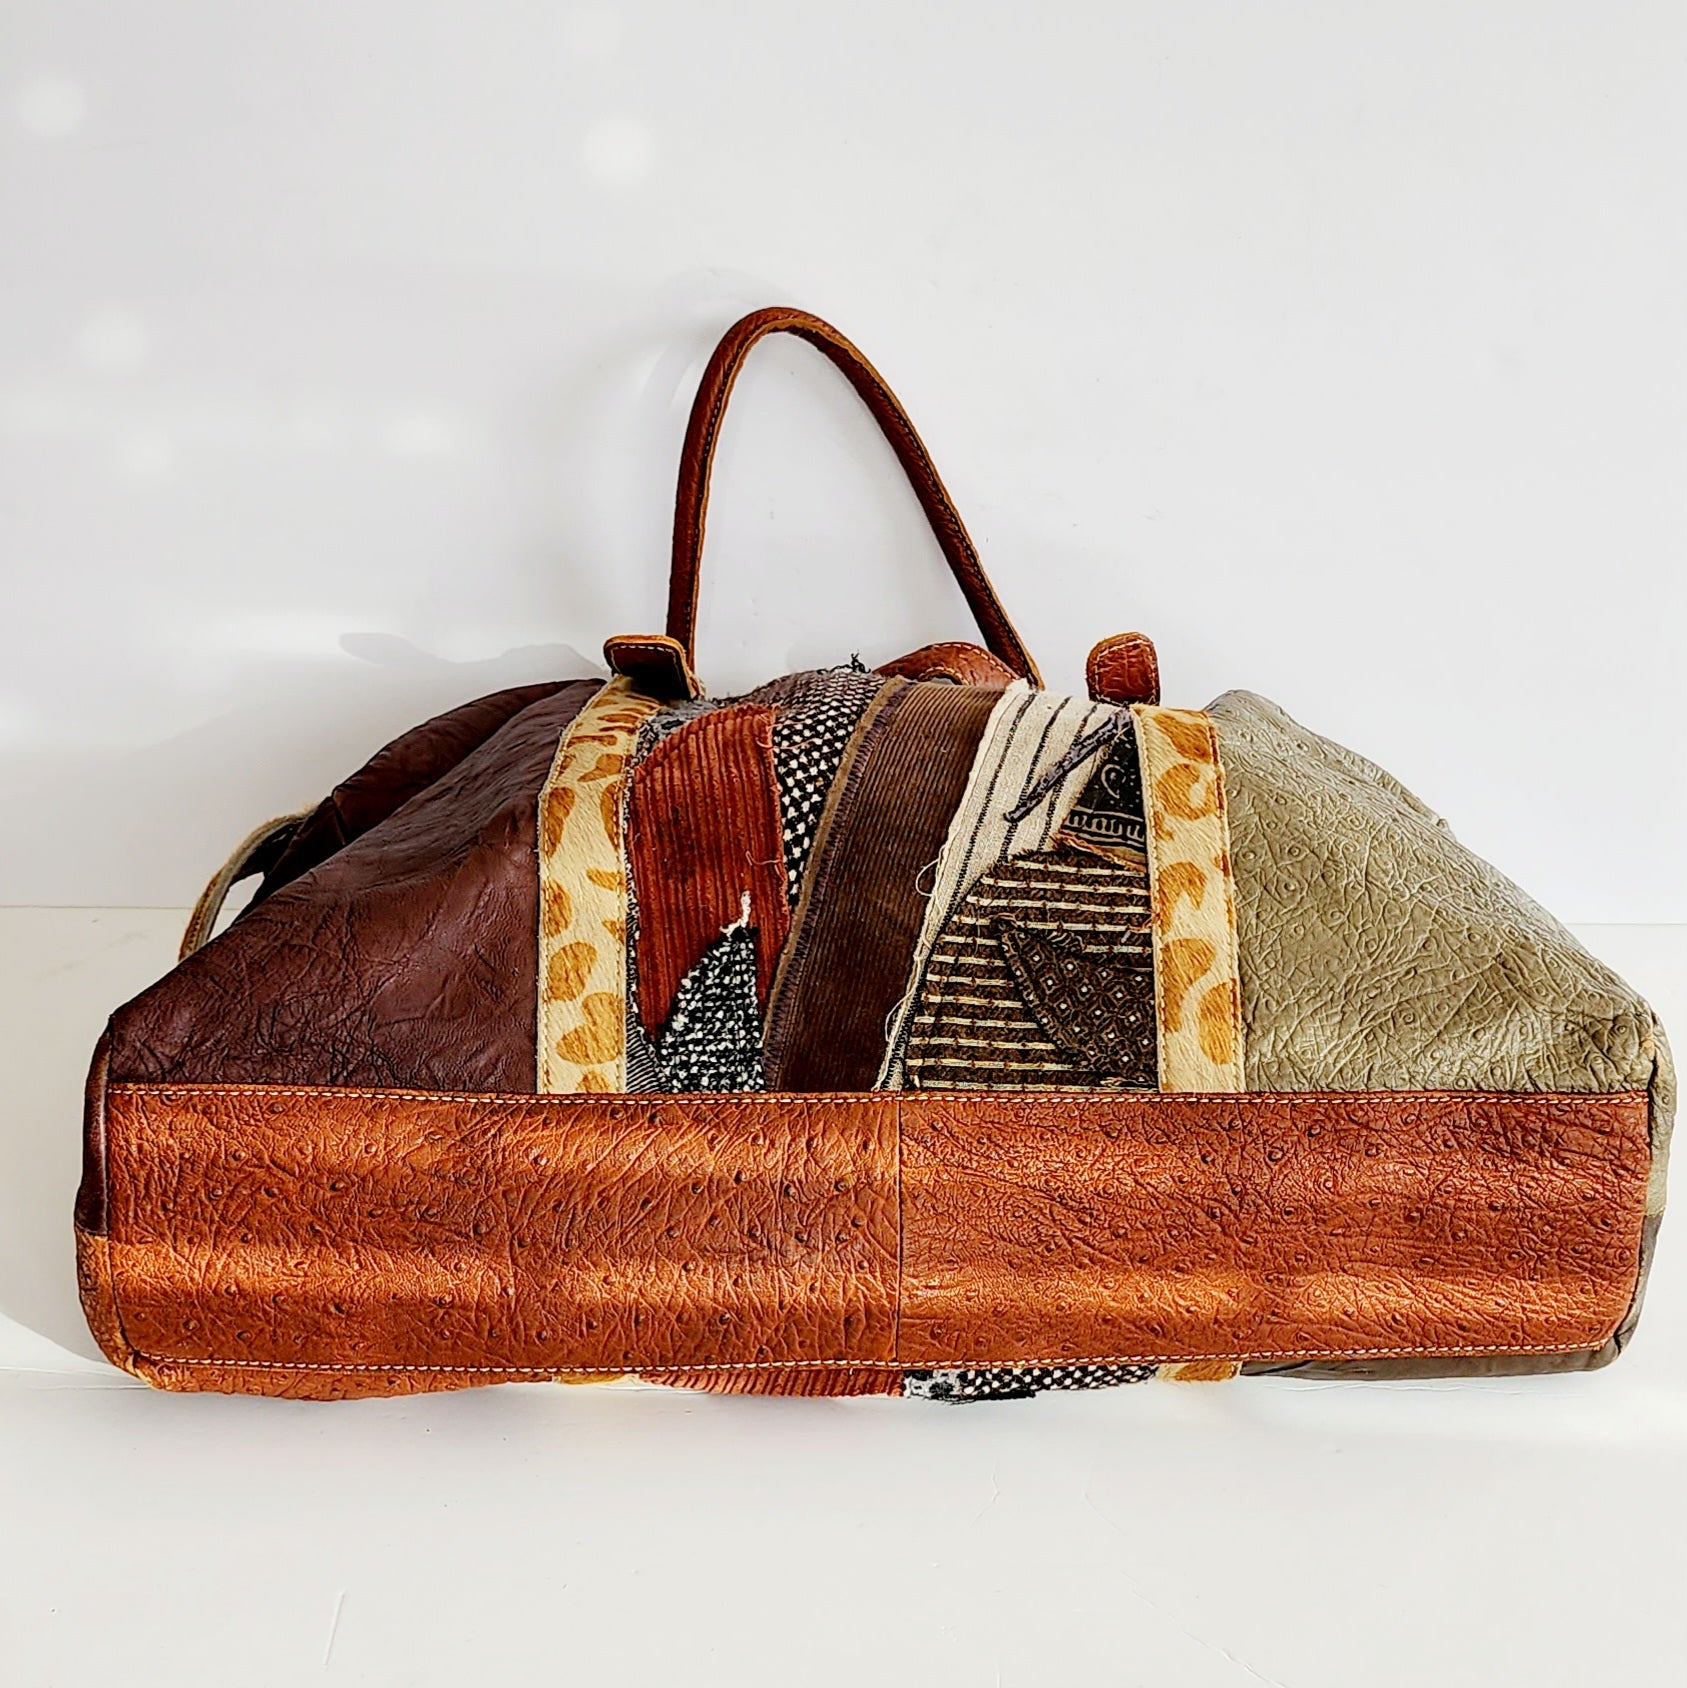 Handmade Patchwork Duffle Bag in Leather & Fabric by Frankie 